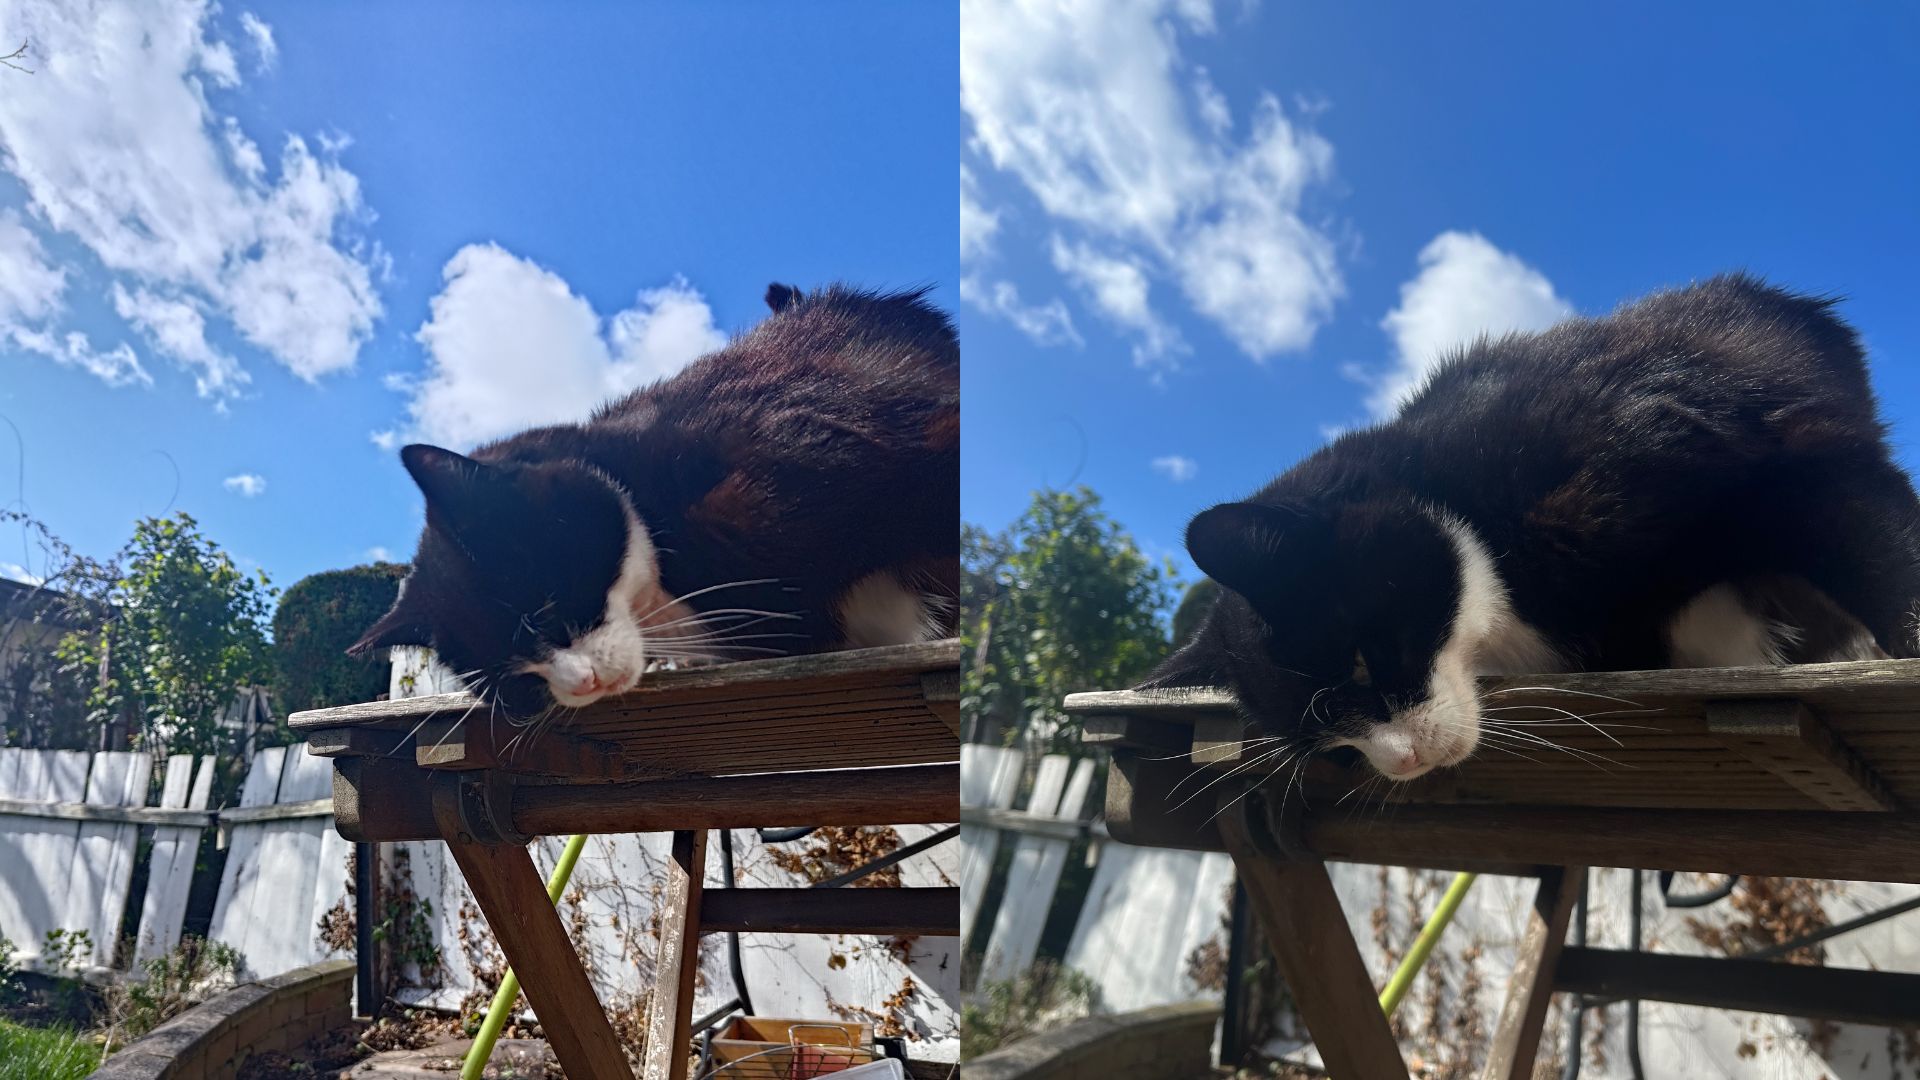 Asus ROG Phone 7 review - two very similar photos of a cat, scratching its head on a table its standing on, with a few clouds in a blue sky above.